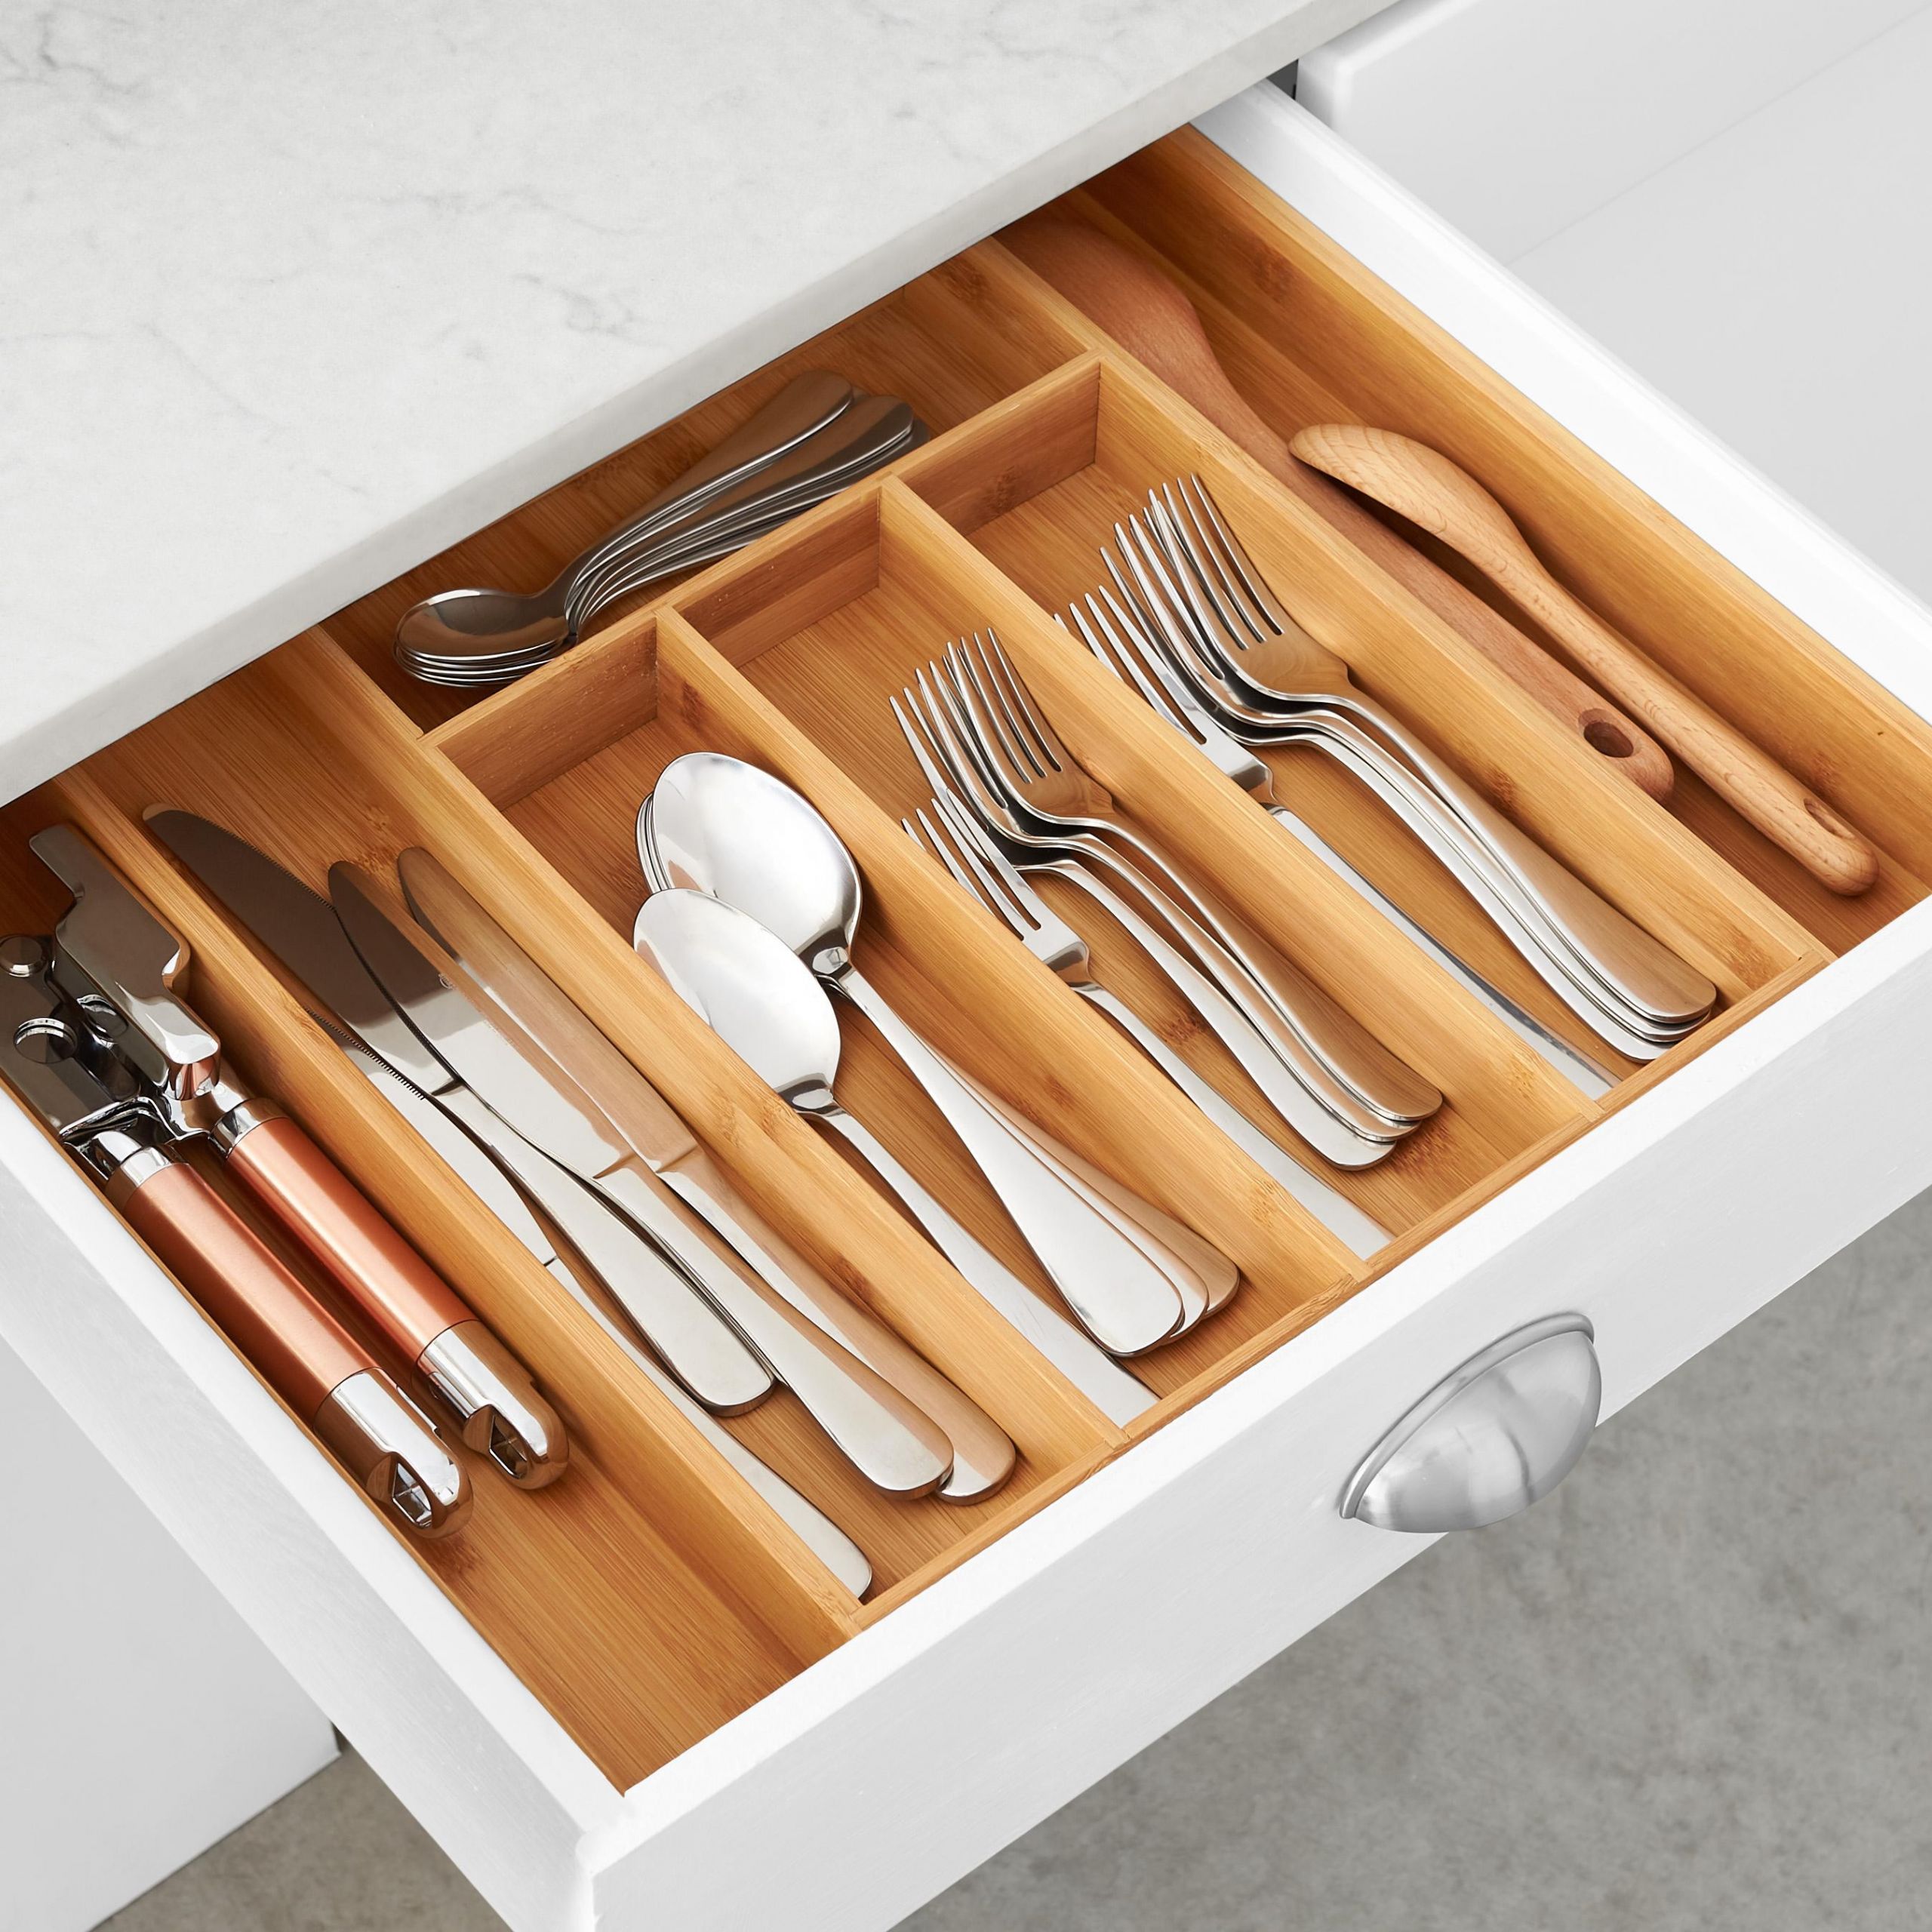 30 Amazing Drawer organizers Kitchen Home Decoration and Inspiration